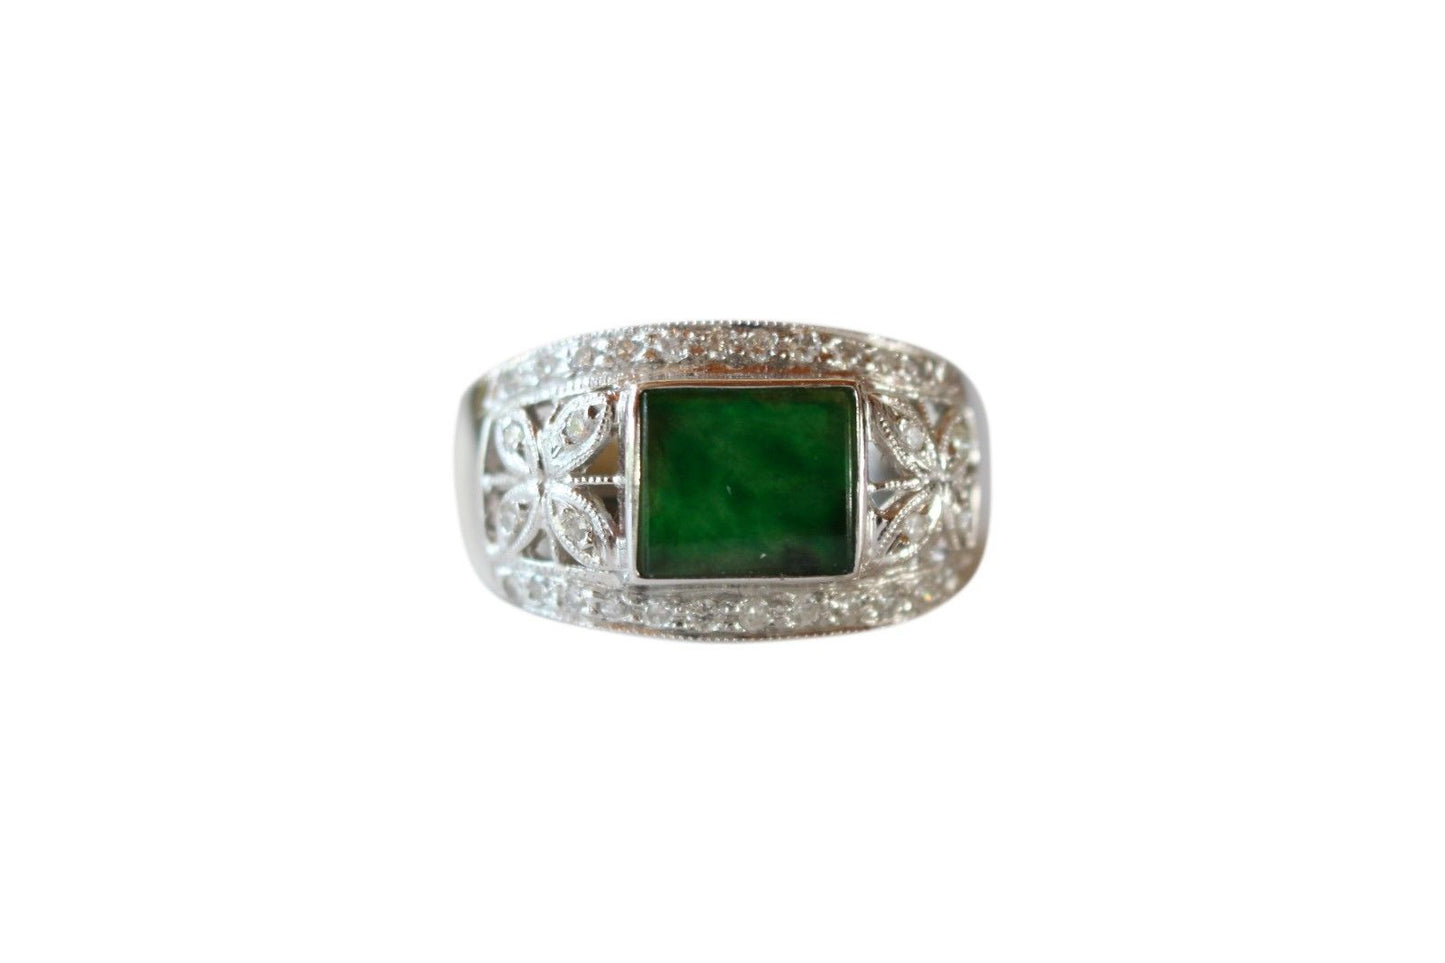 Fine Size 6.5 Rectangular Imperial Jade Ring with 0.32ct Diamonds 18K Gold Band